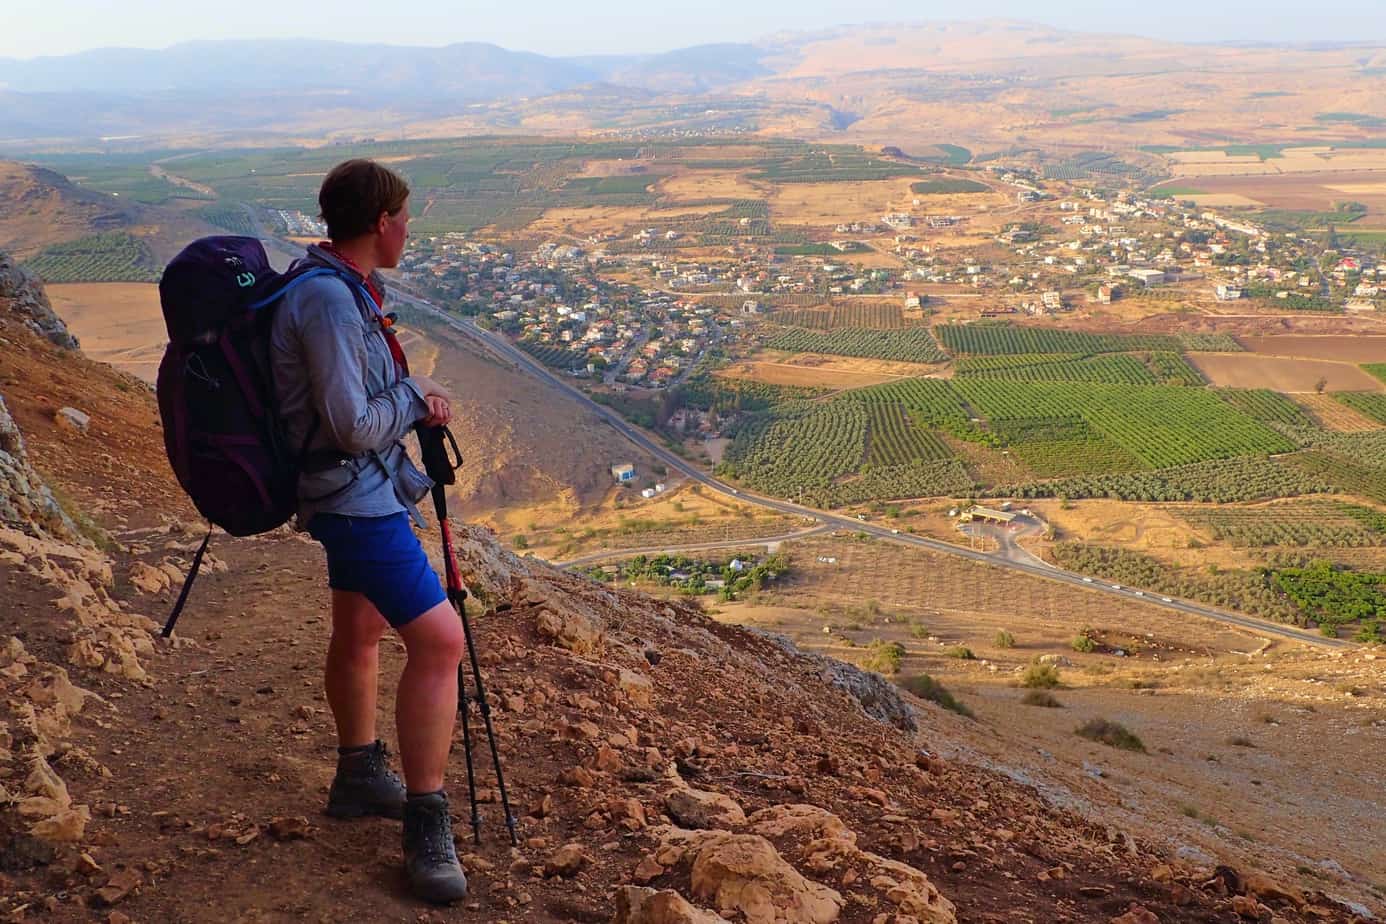 Me looking at the view from Mt Arbel